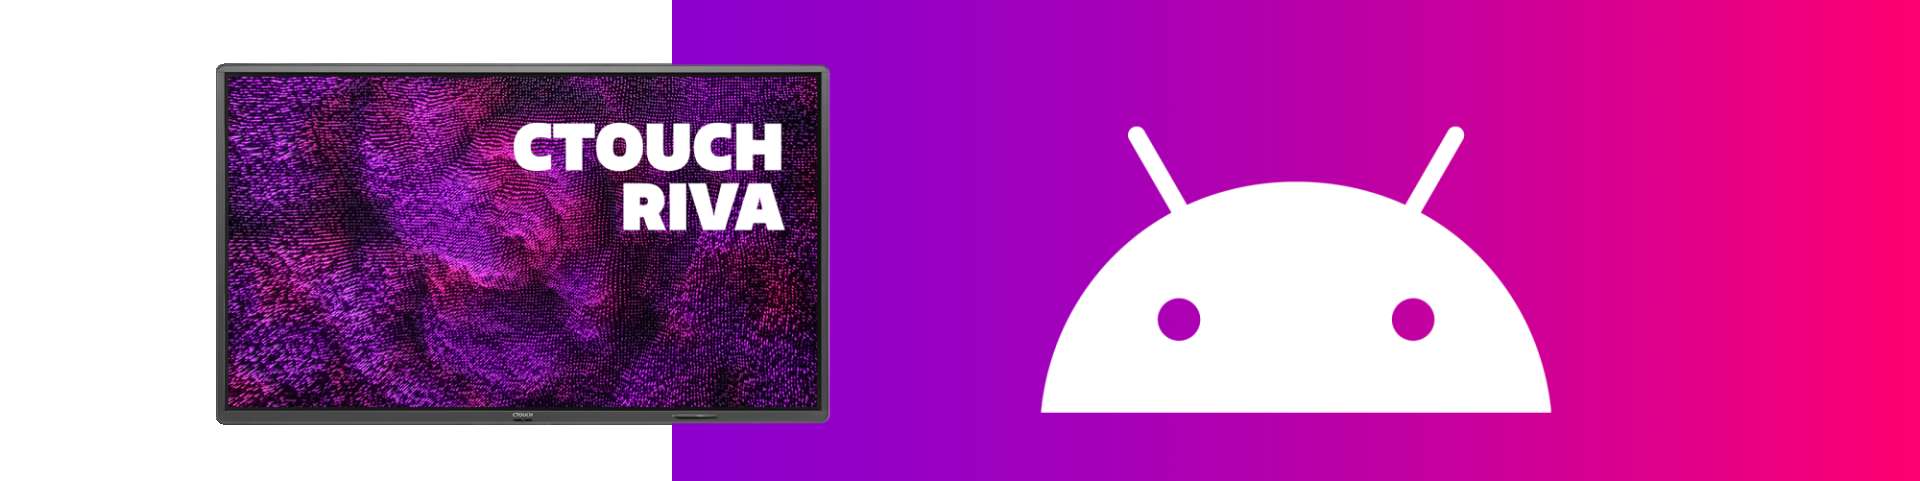 CTOUCH Riva Android Teaser Webbanner3200 X802